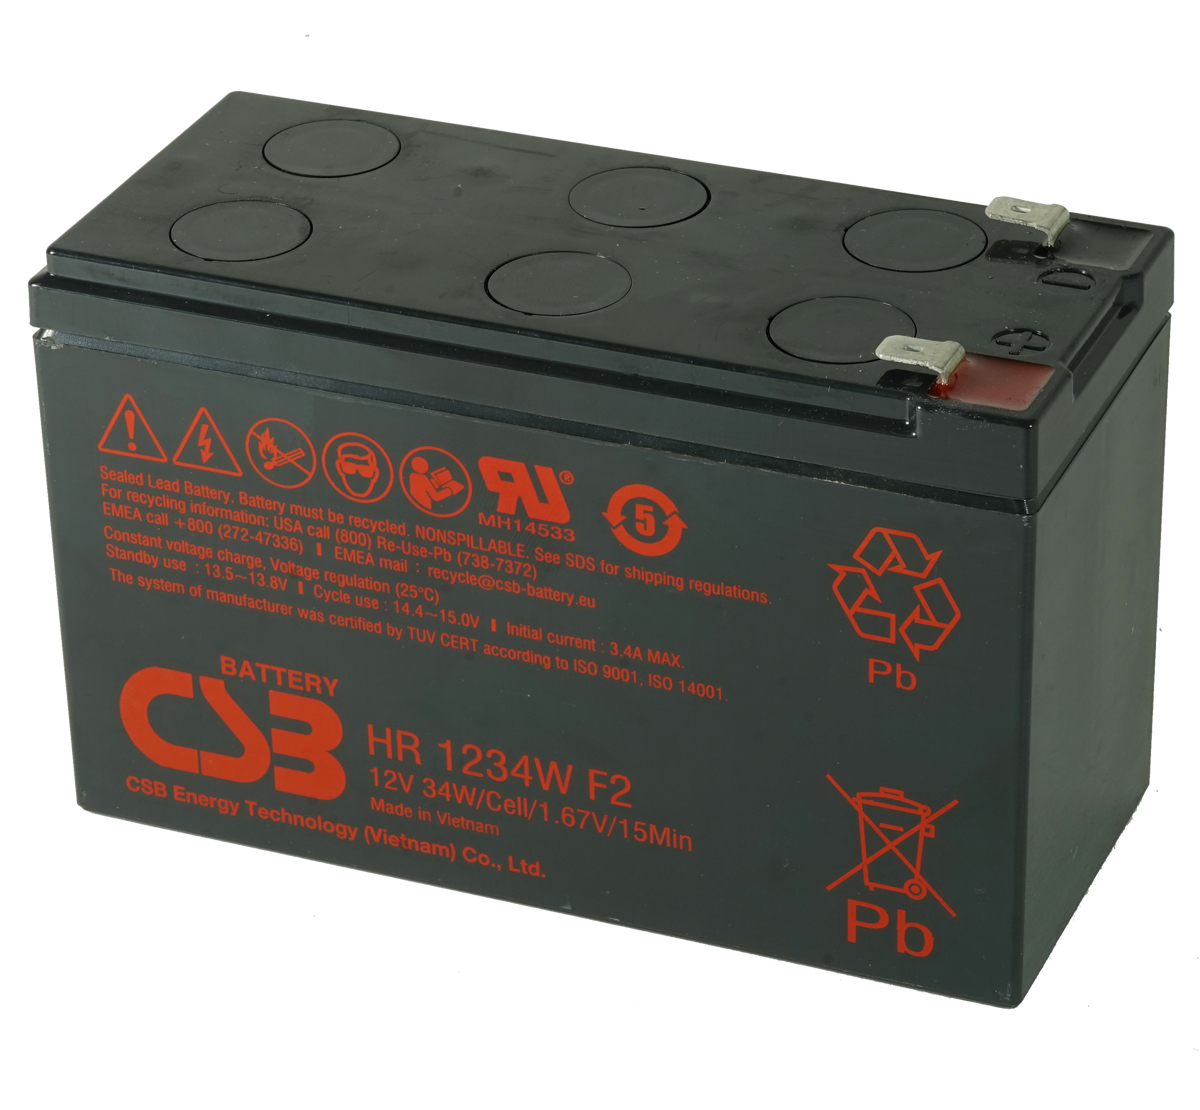 MDS2300 UPS Battery Kit for MGE AB2300